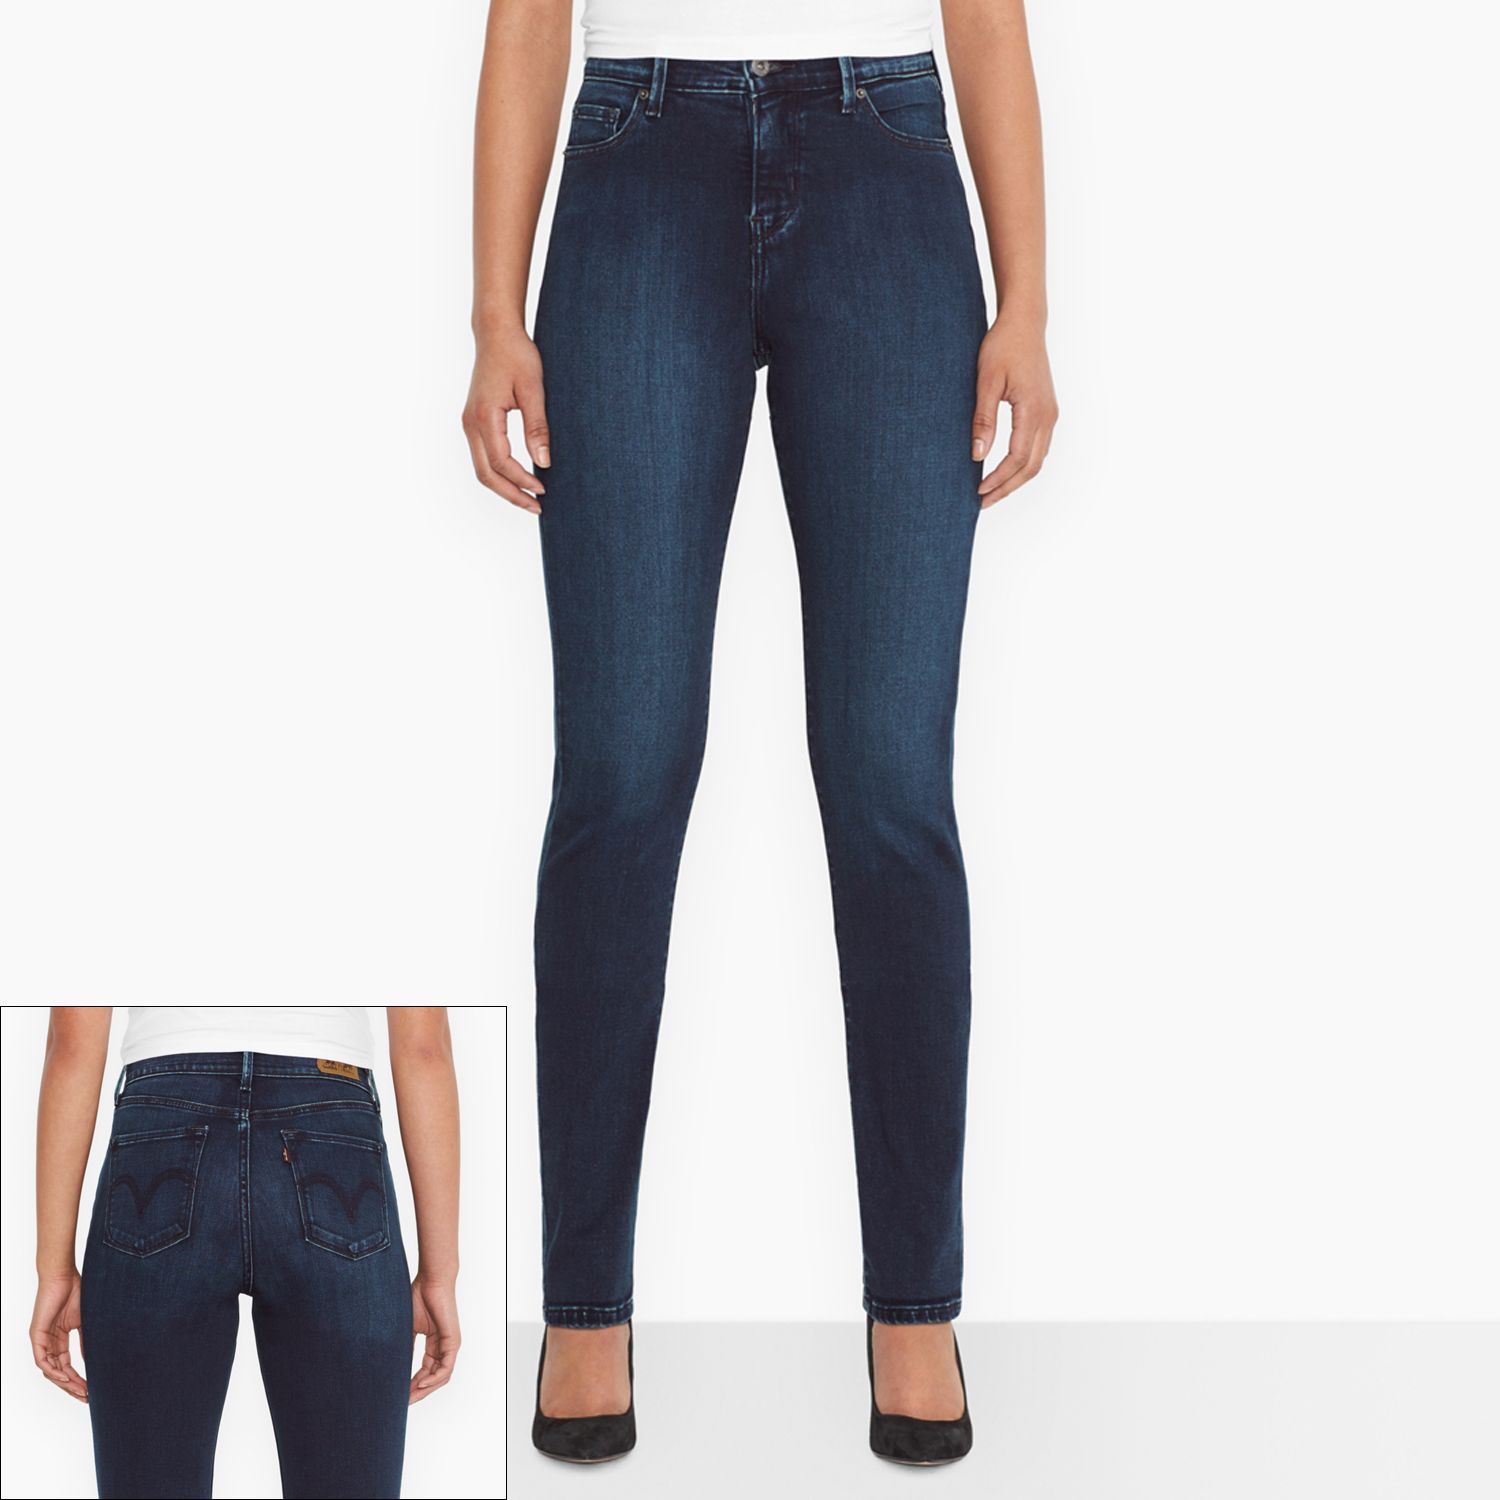 levi's 512 perfectly slimming jeans